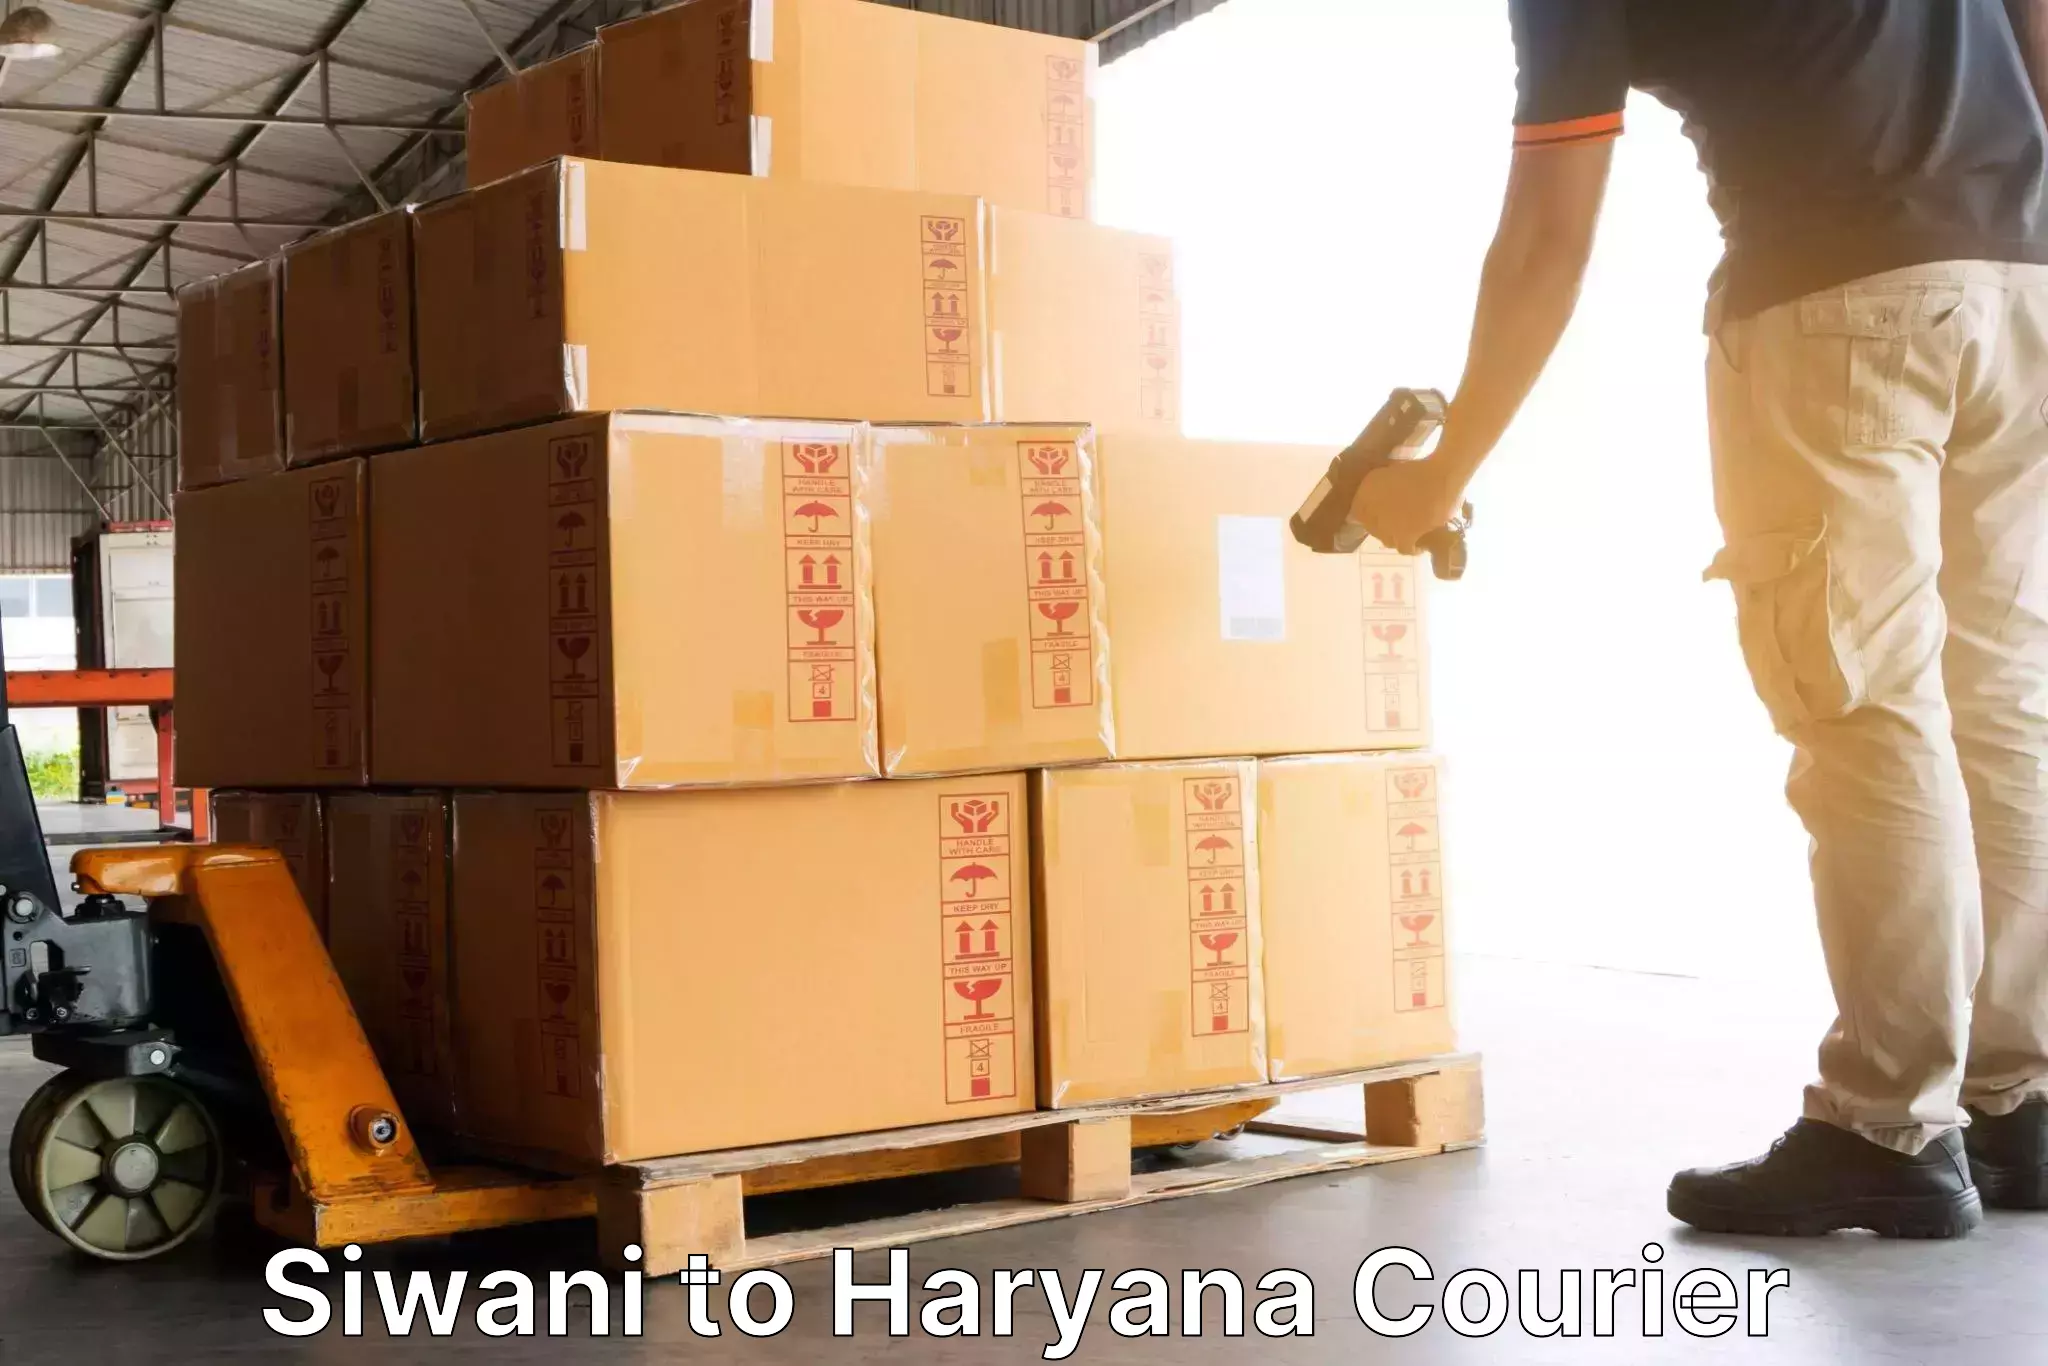 Express delivery capabilities Siwani to Fatehabad